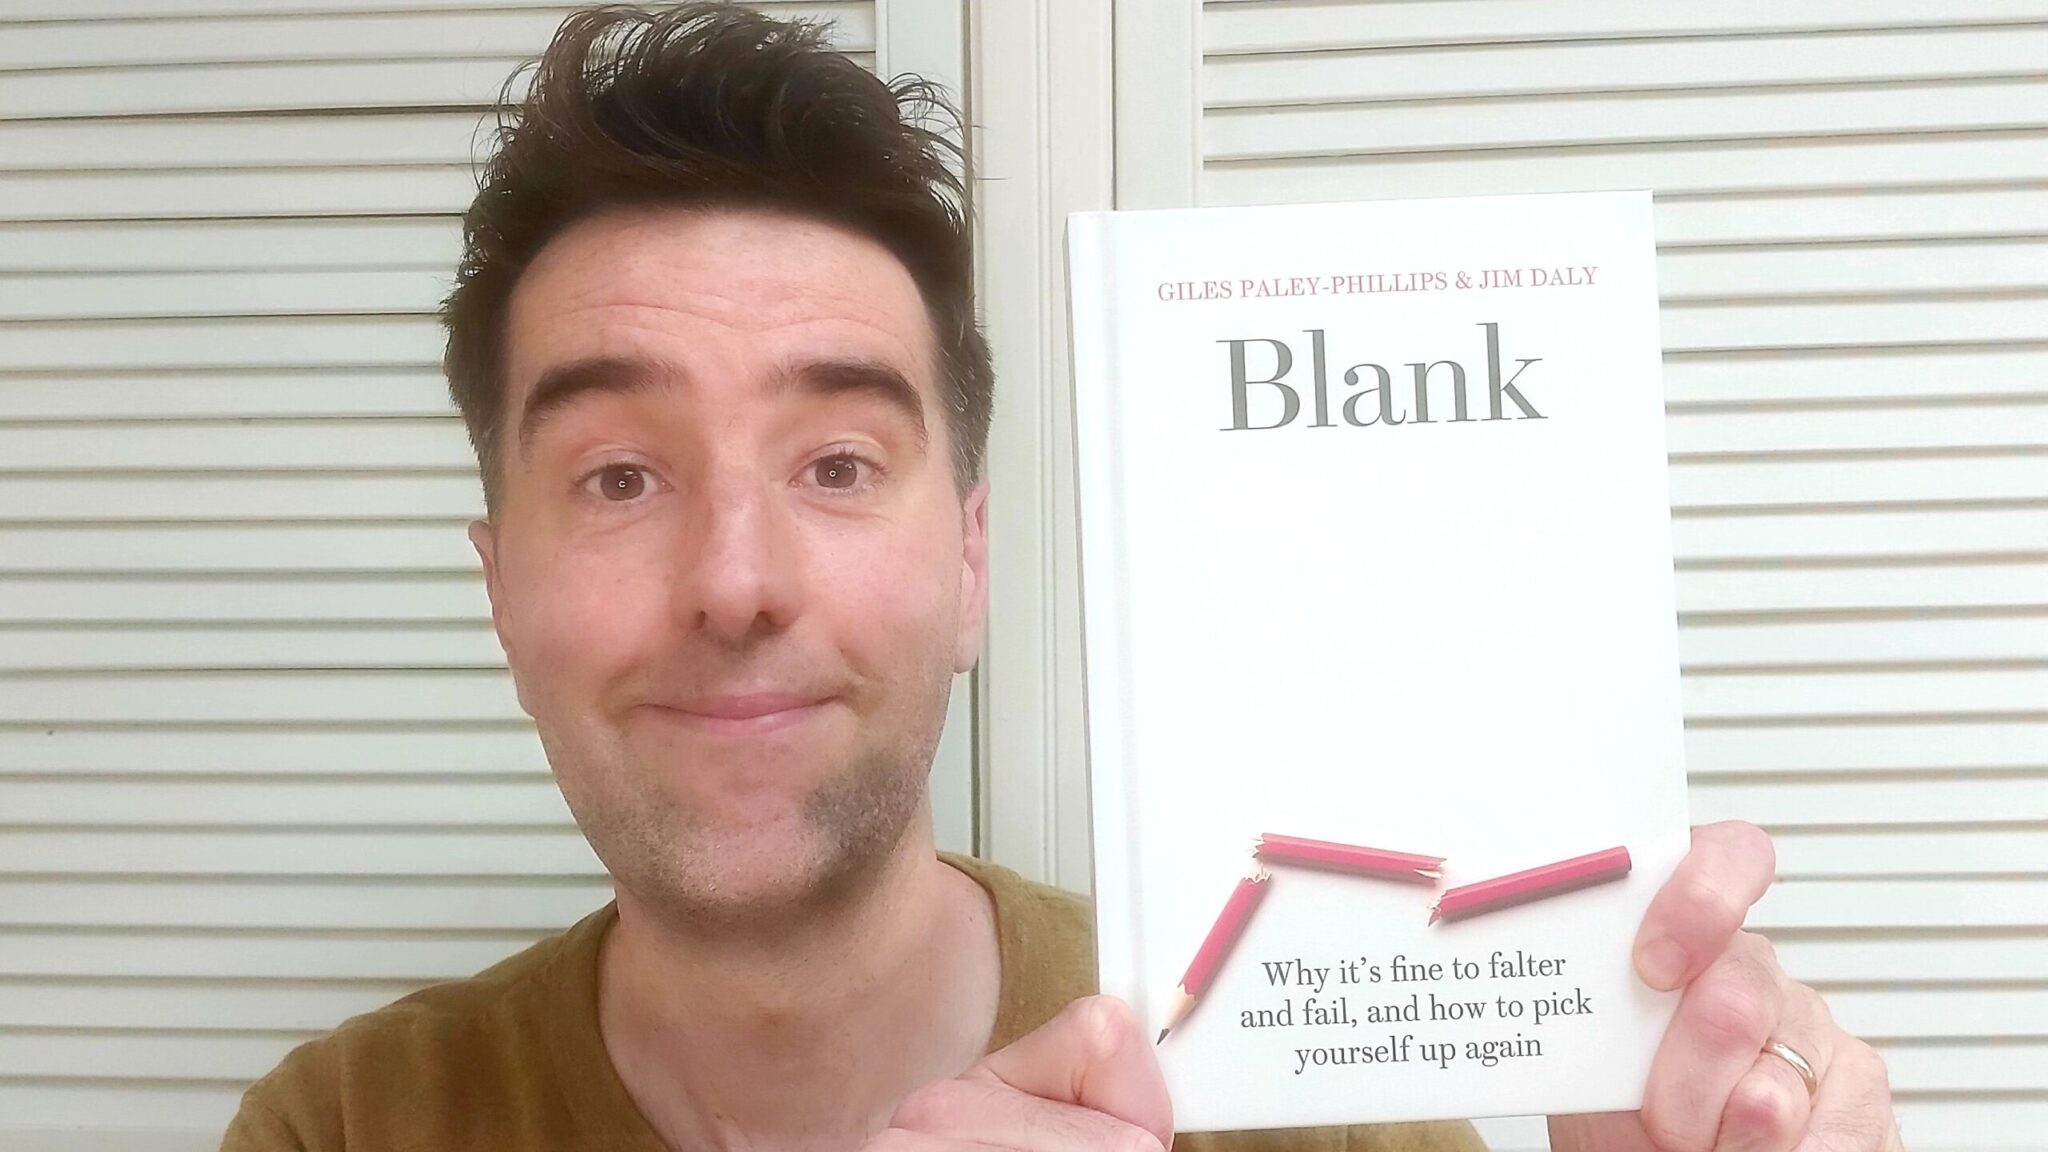 All You Need To Know About the BLANK Book and How Dadvengers Helped Inspire It